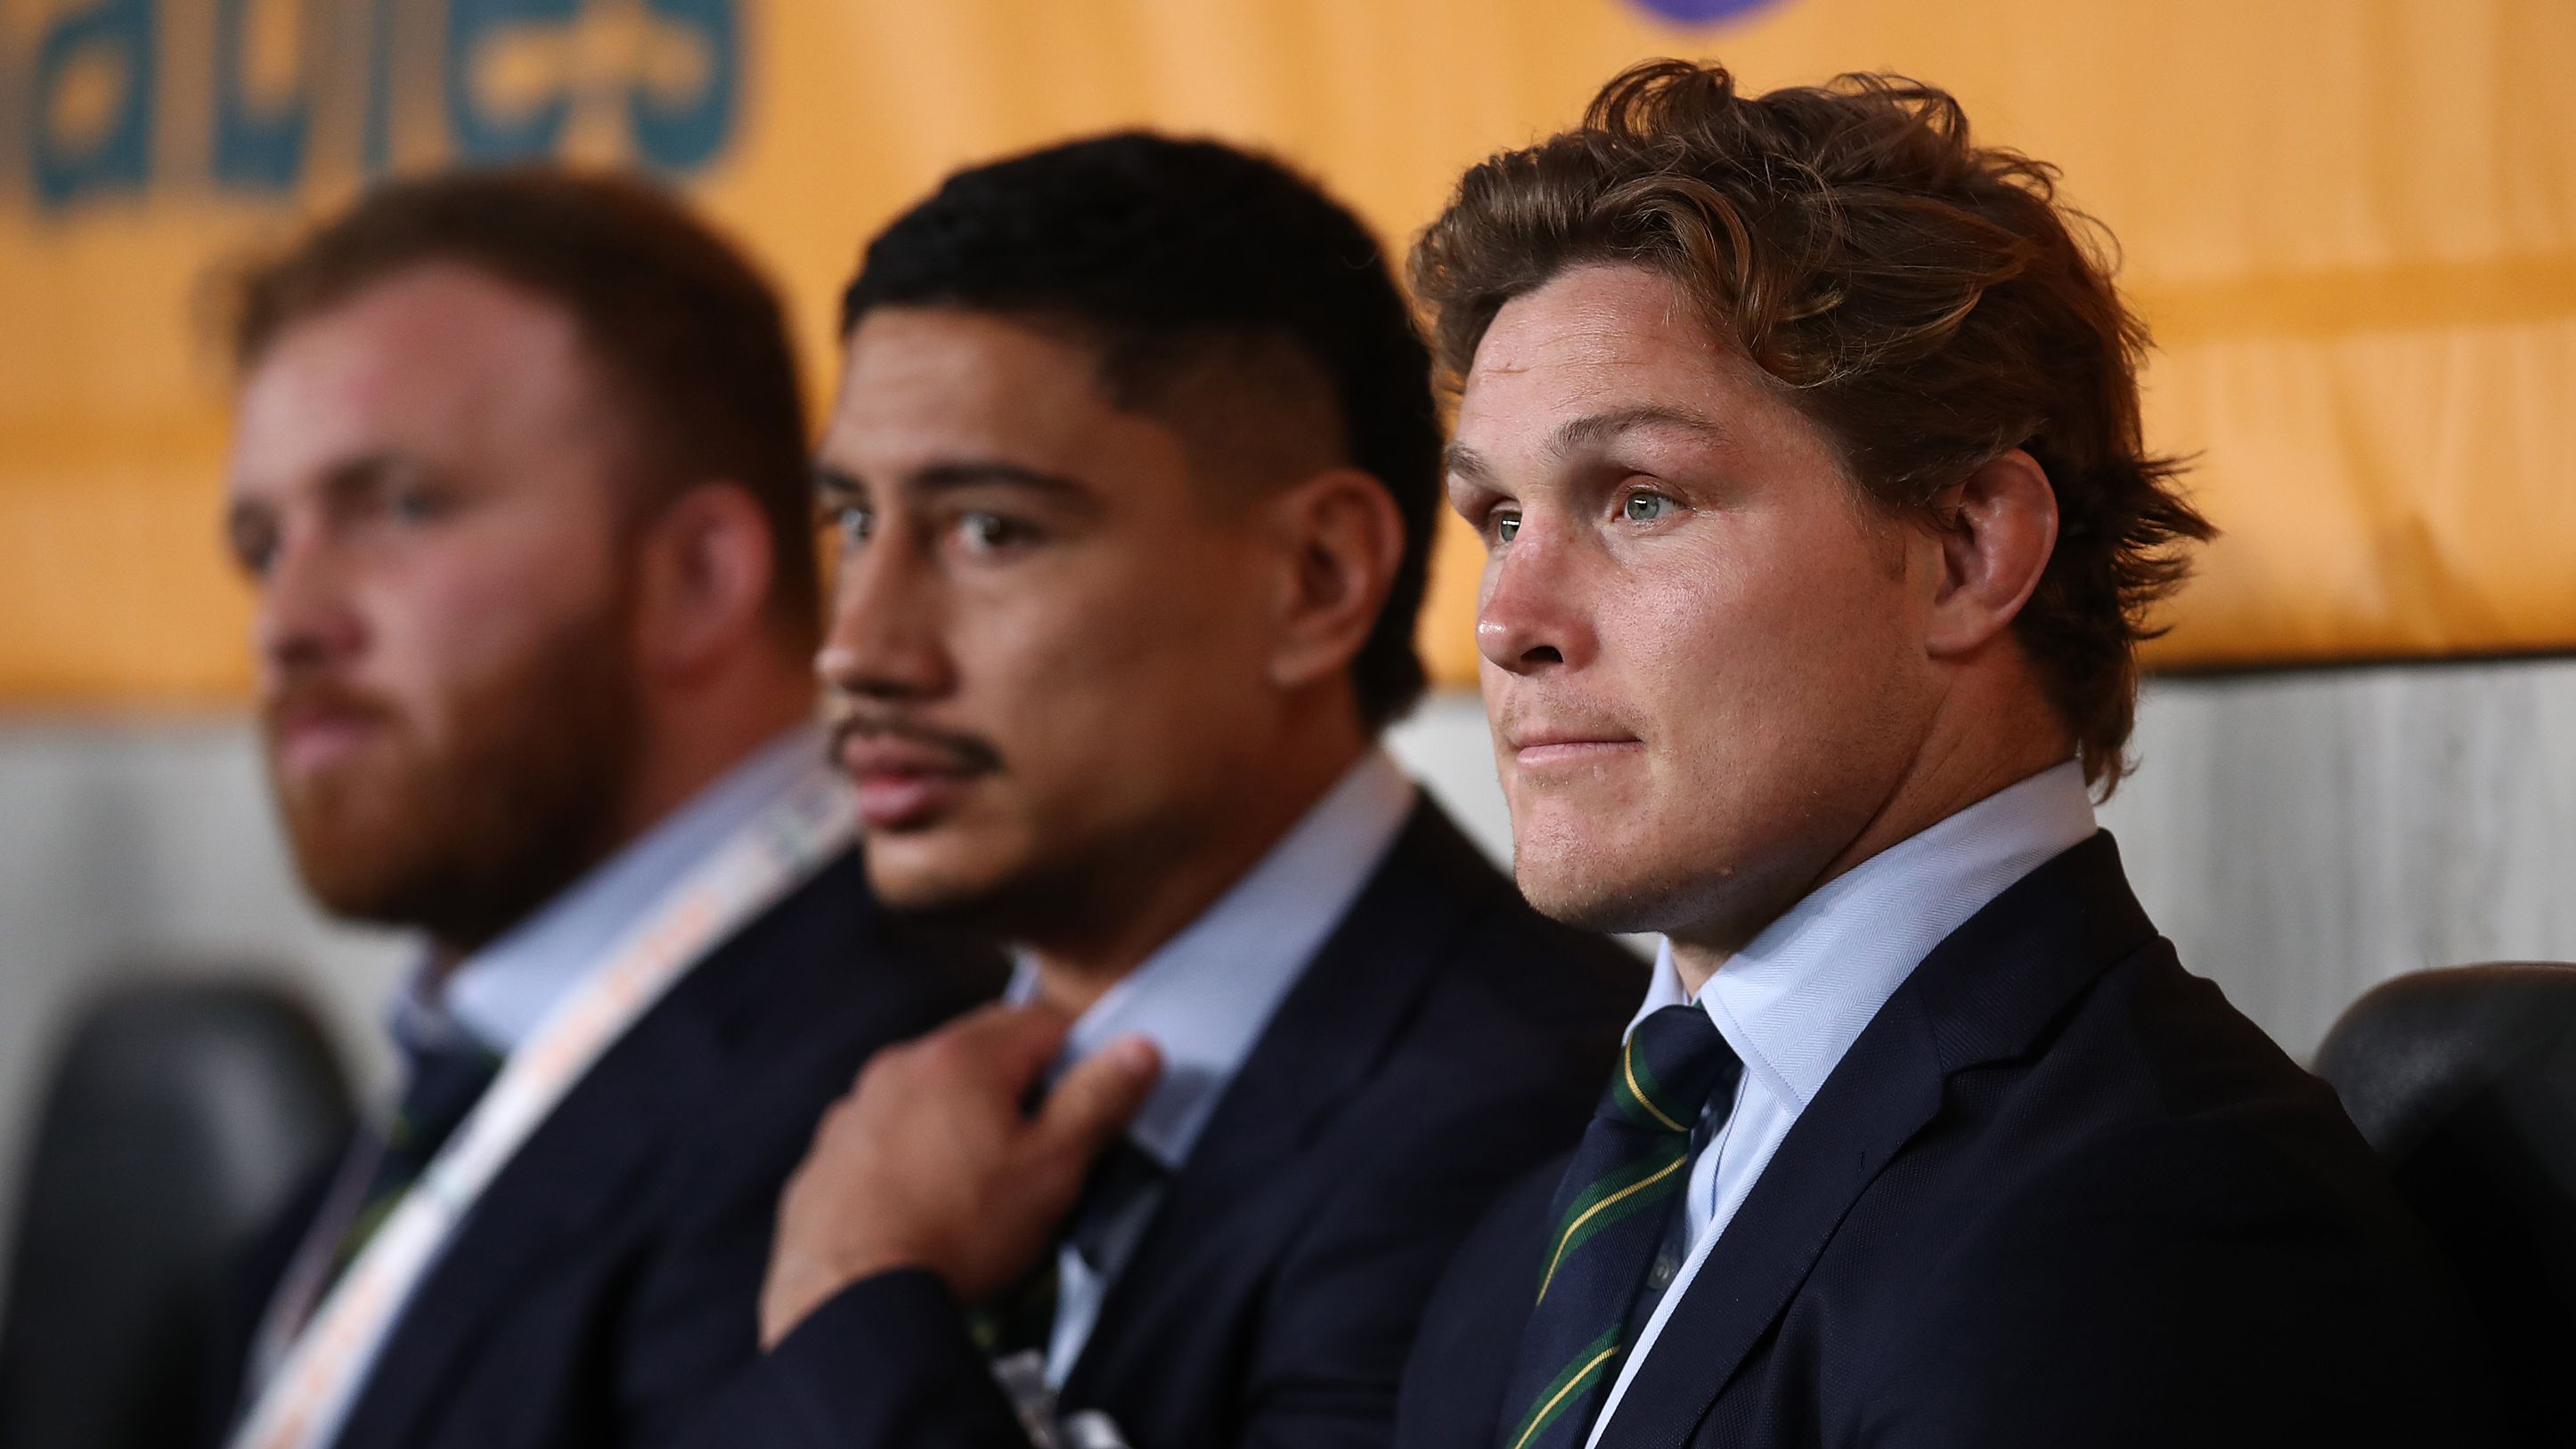 Michael Hooper of the Wallabies (right) looks on during with teammates during the Rugby Championship match between the Australia and Argentina.